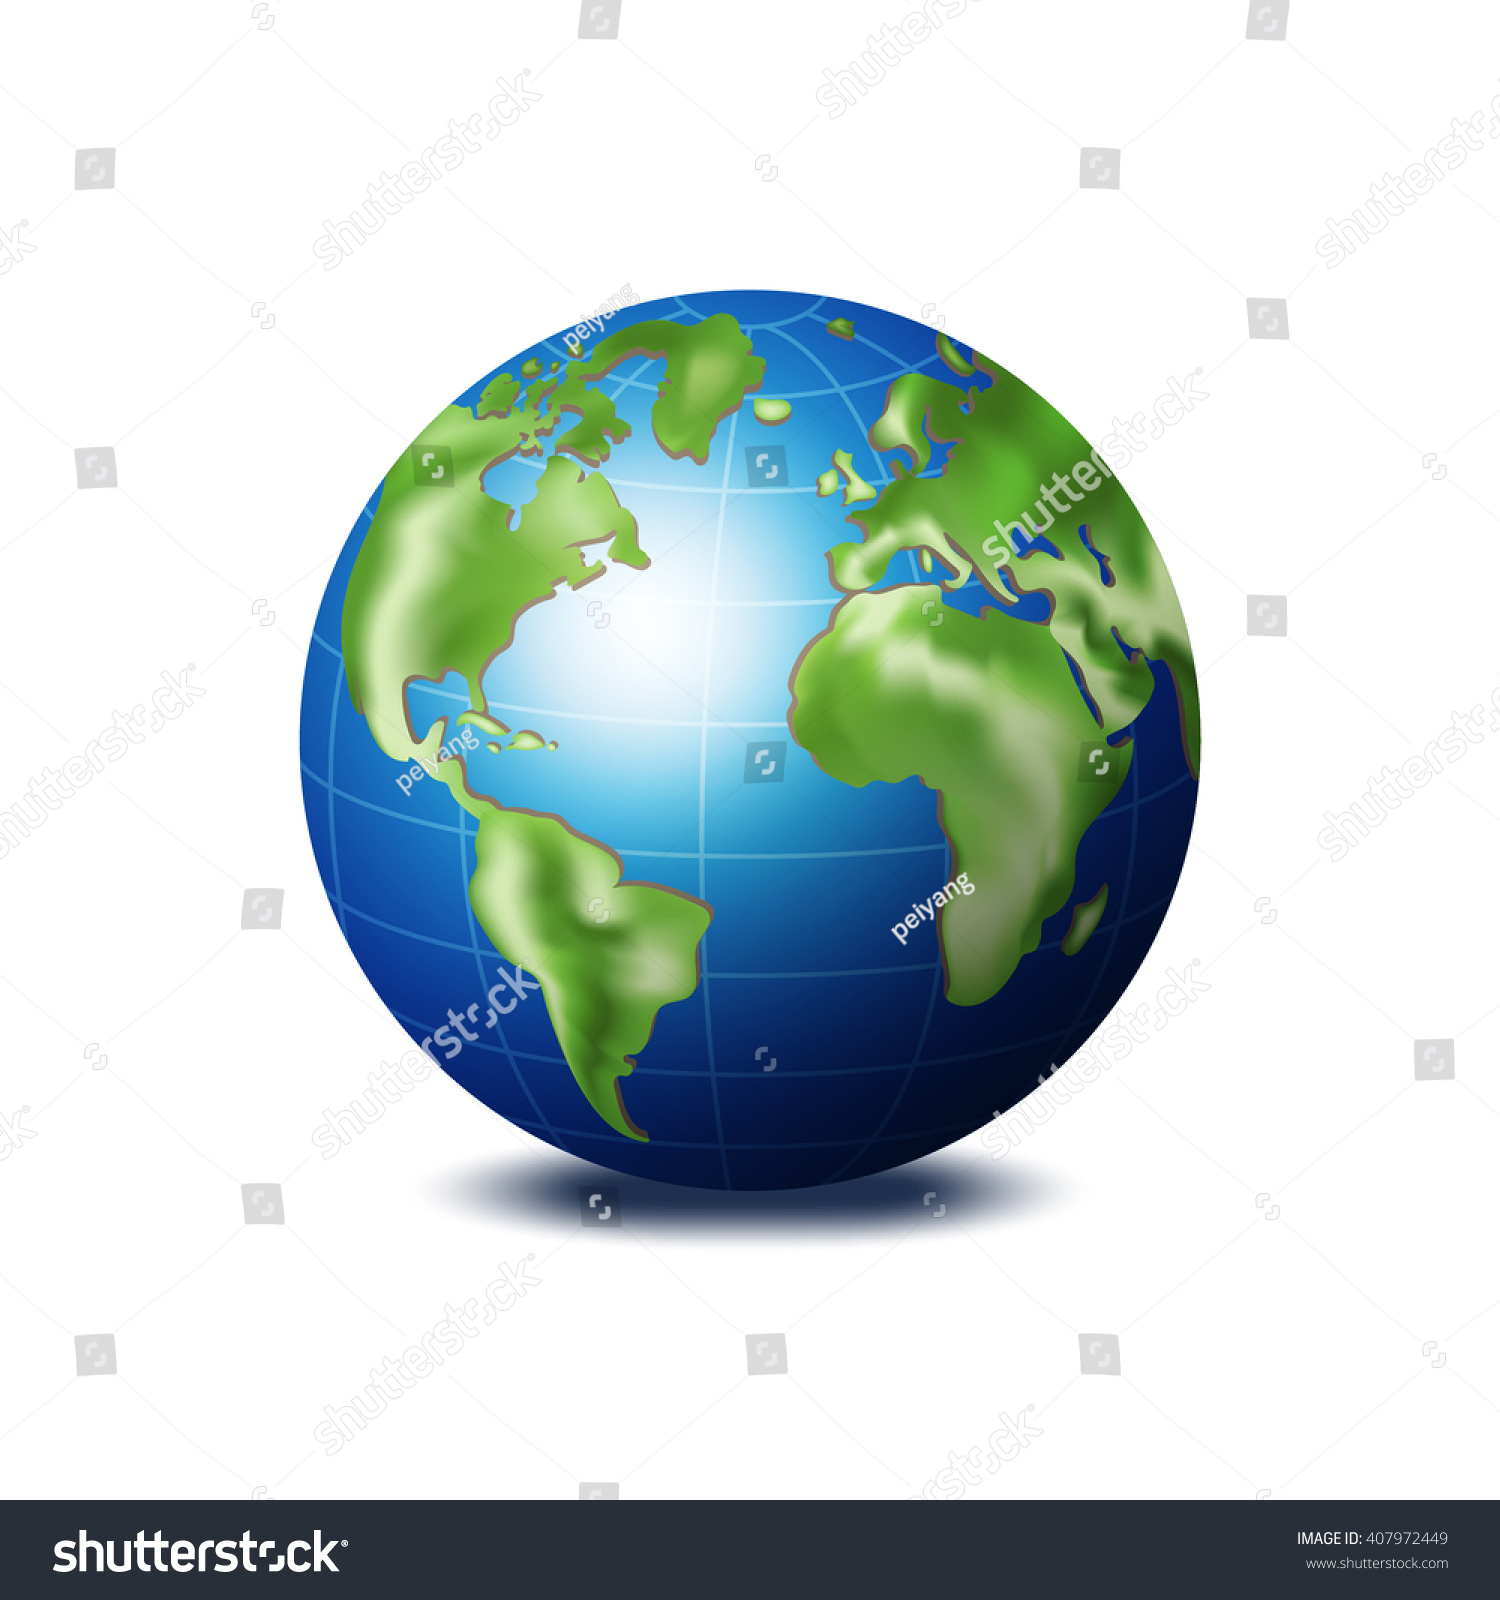 Download 3d View Earth World Globe Vector Stock Vector 407972449 ...